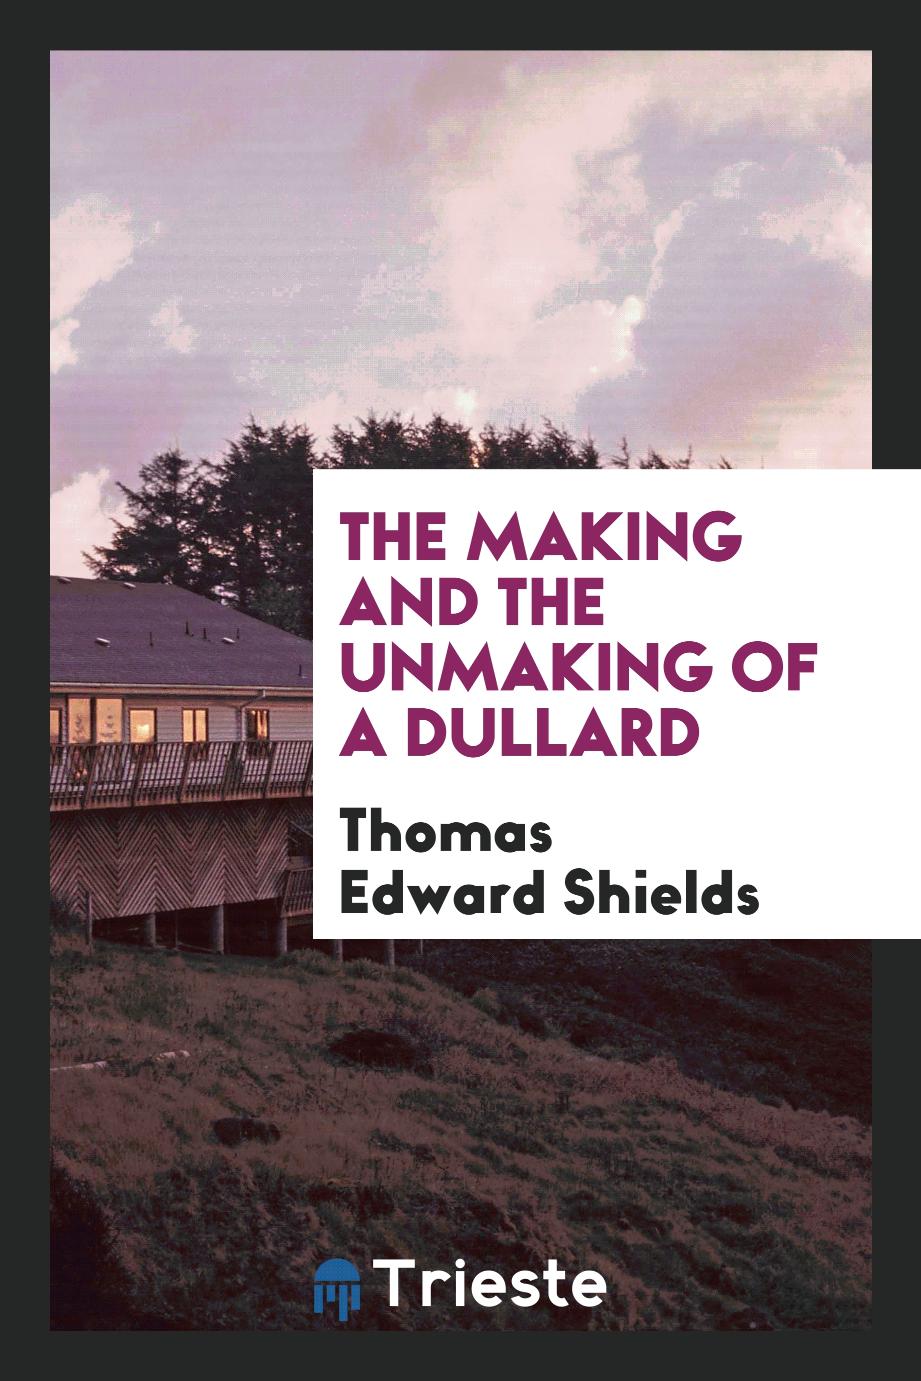 Thomas Edward Shields - The Making and the Unmaking of a Dullard